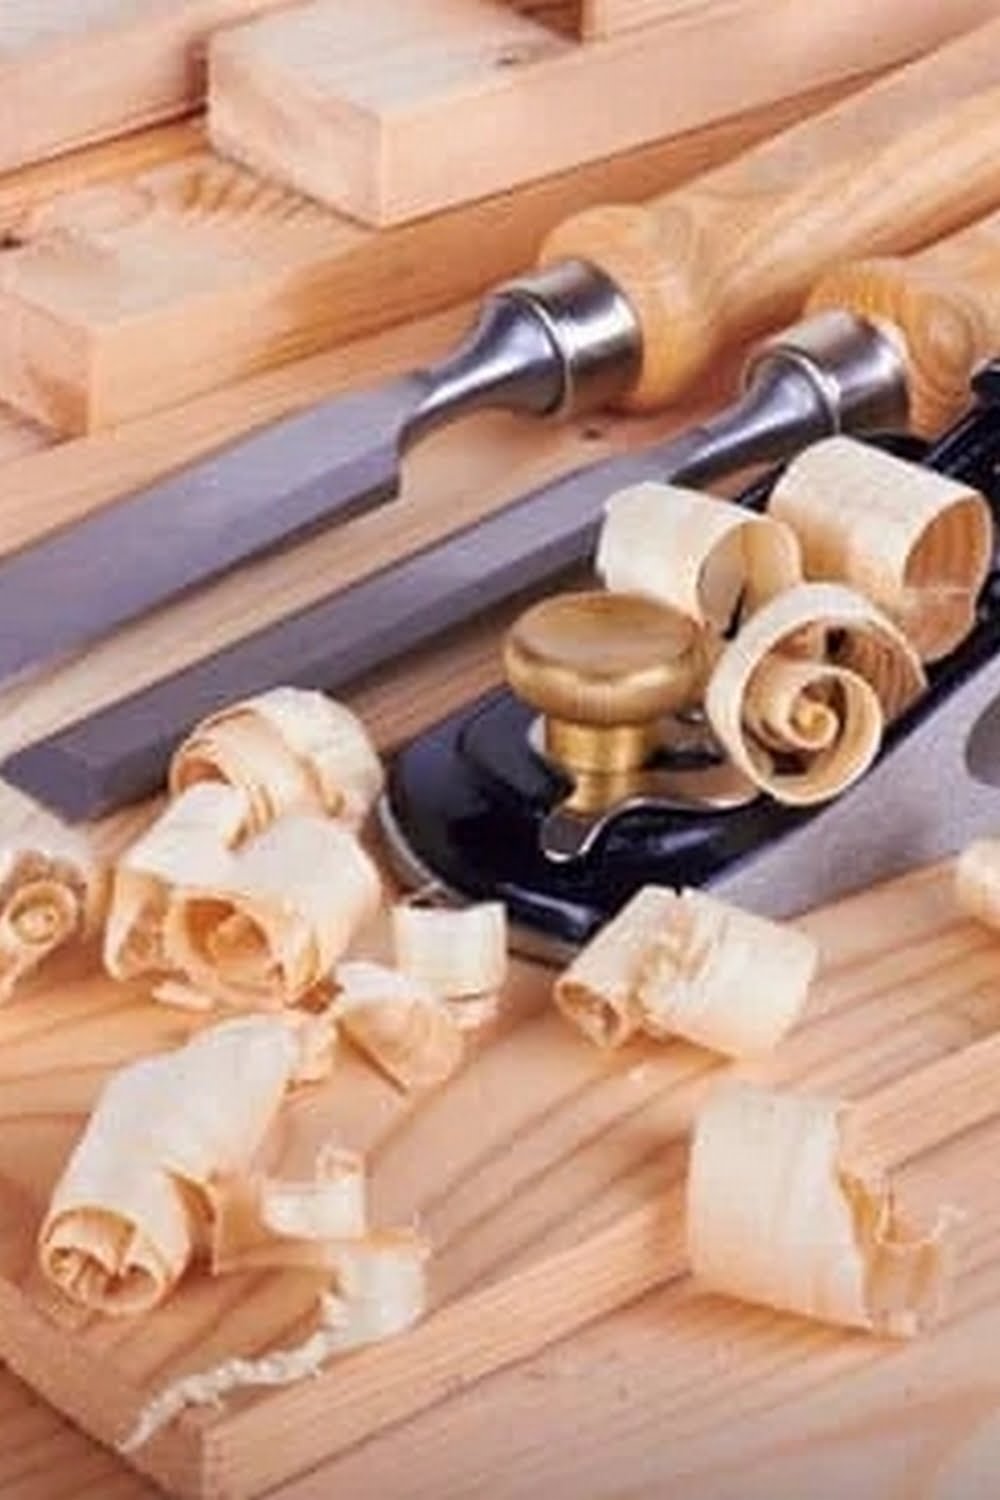 Make Woodworking Easy by Following These Tips